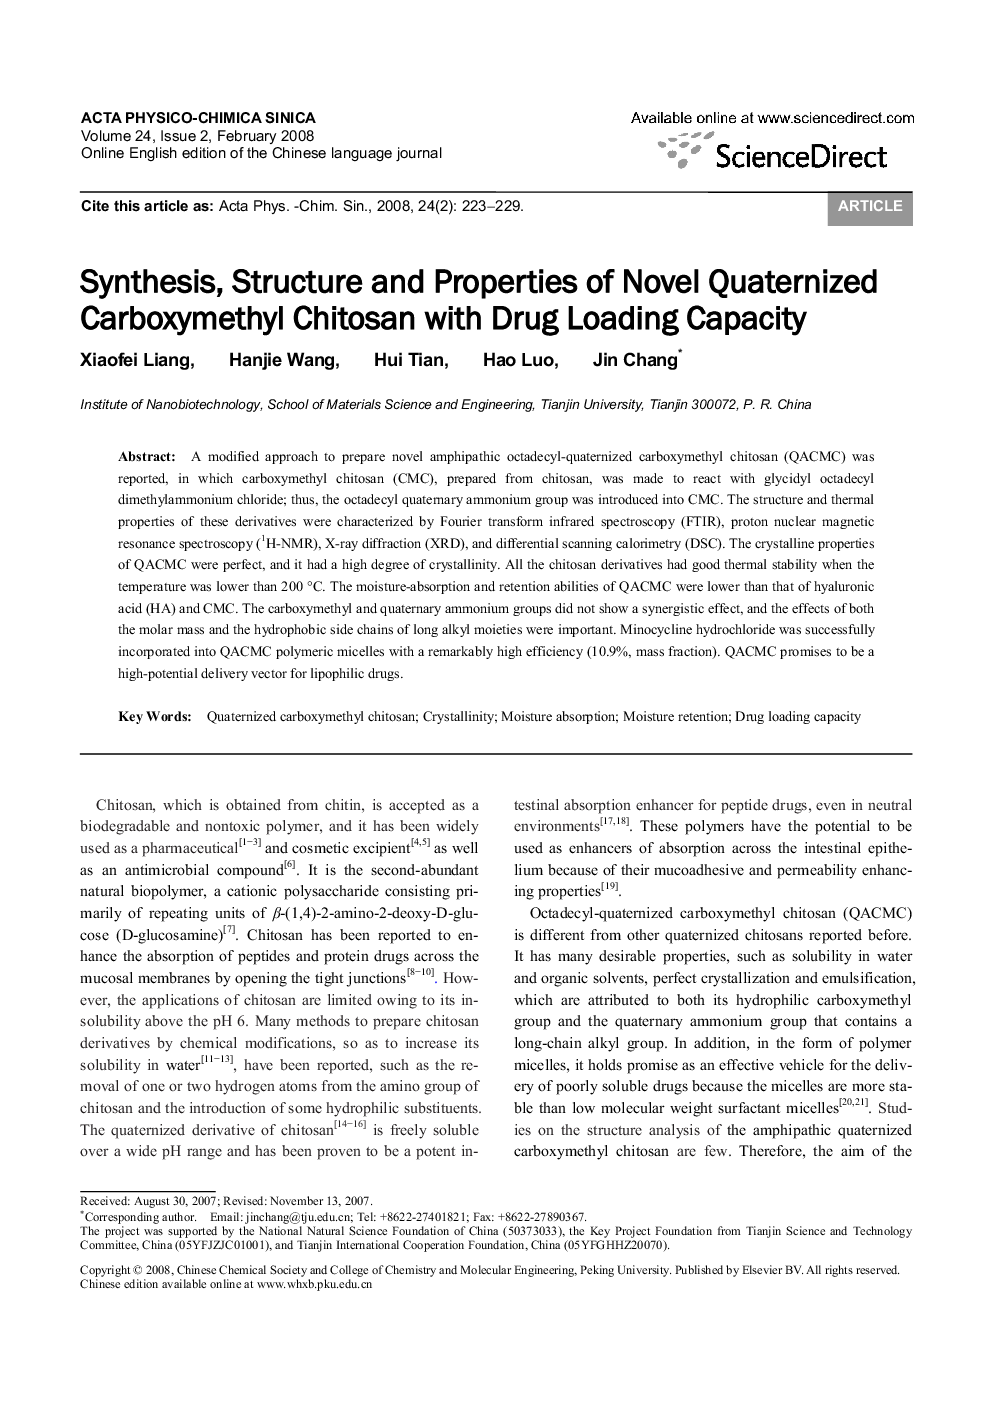 Synthesis, Structure and Properties of Novel Quaternized Carboxymethyl Chitosan with Drug Loading Capacity